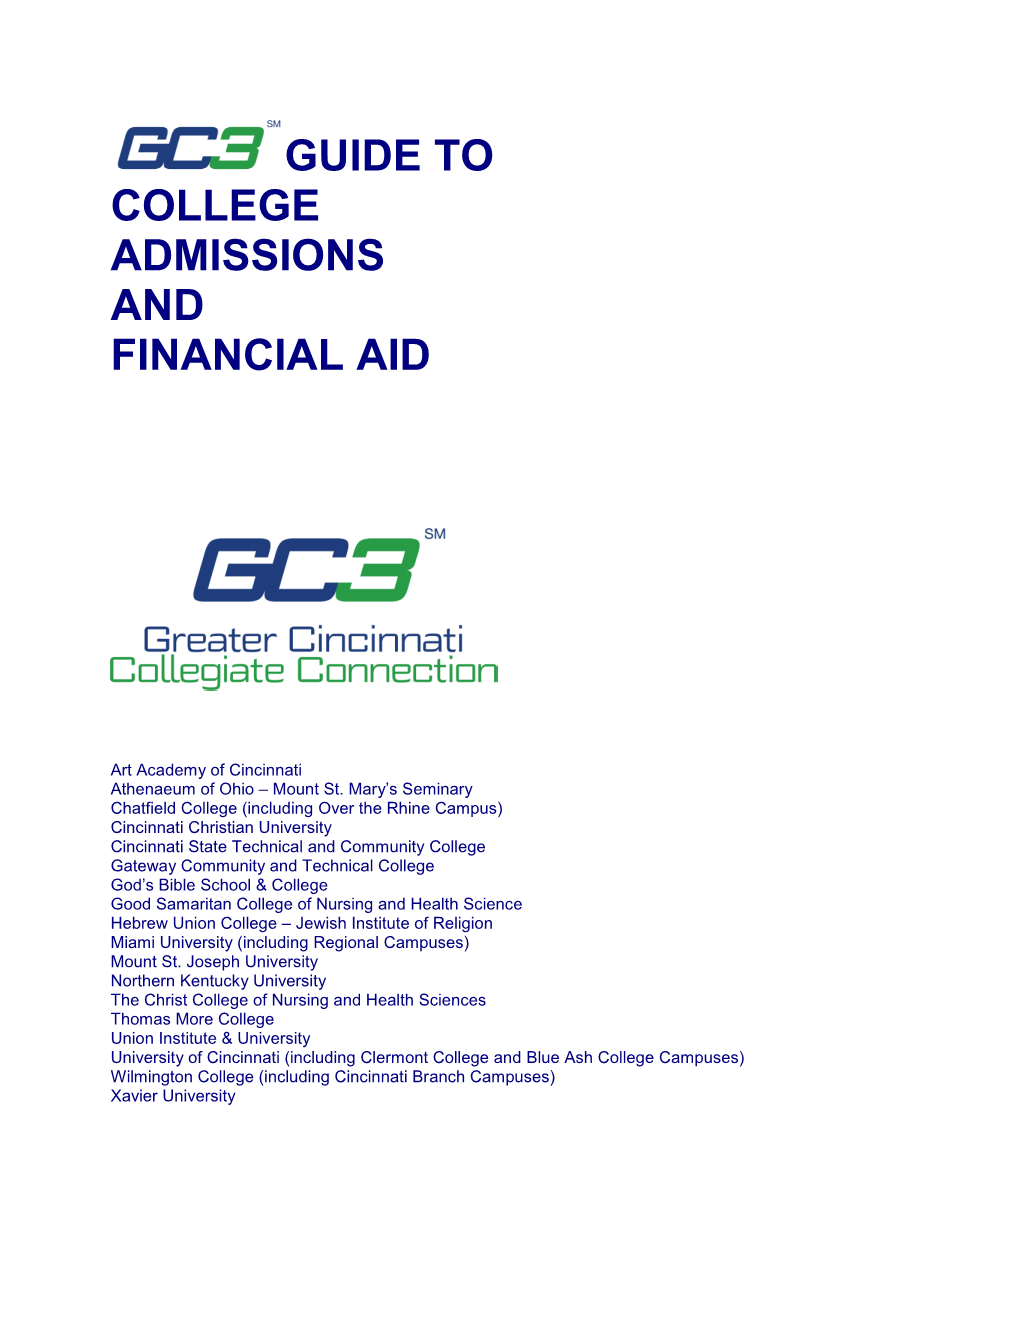 GC3 Guide to Admission and Financial